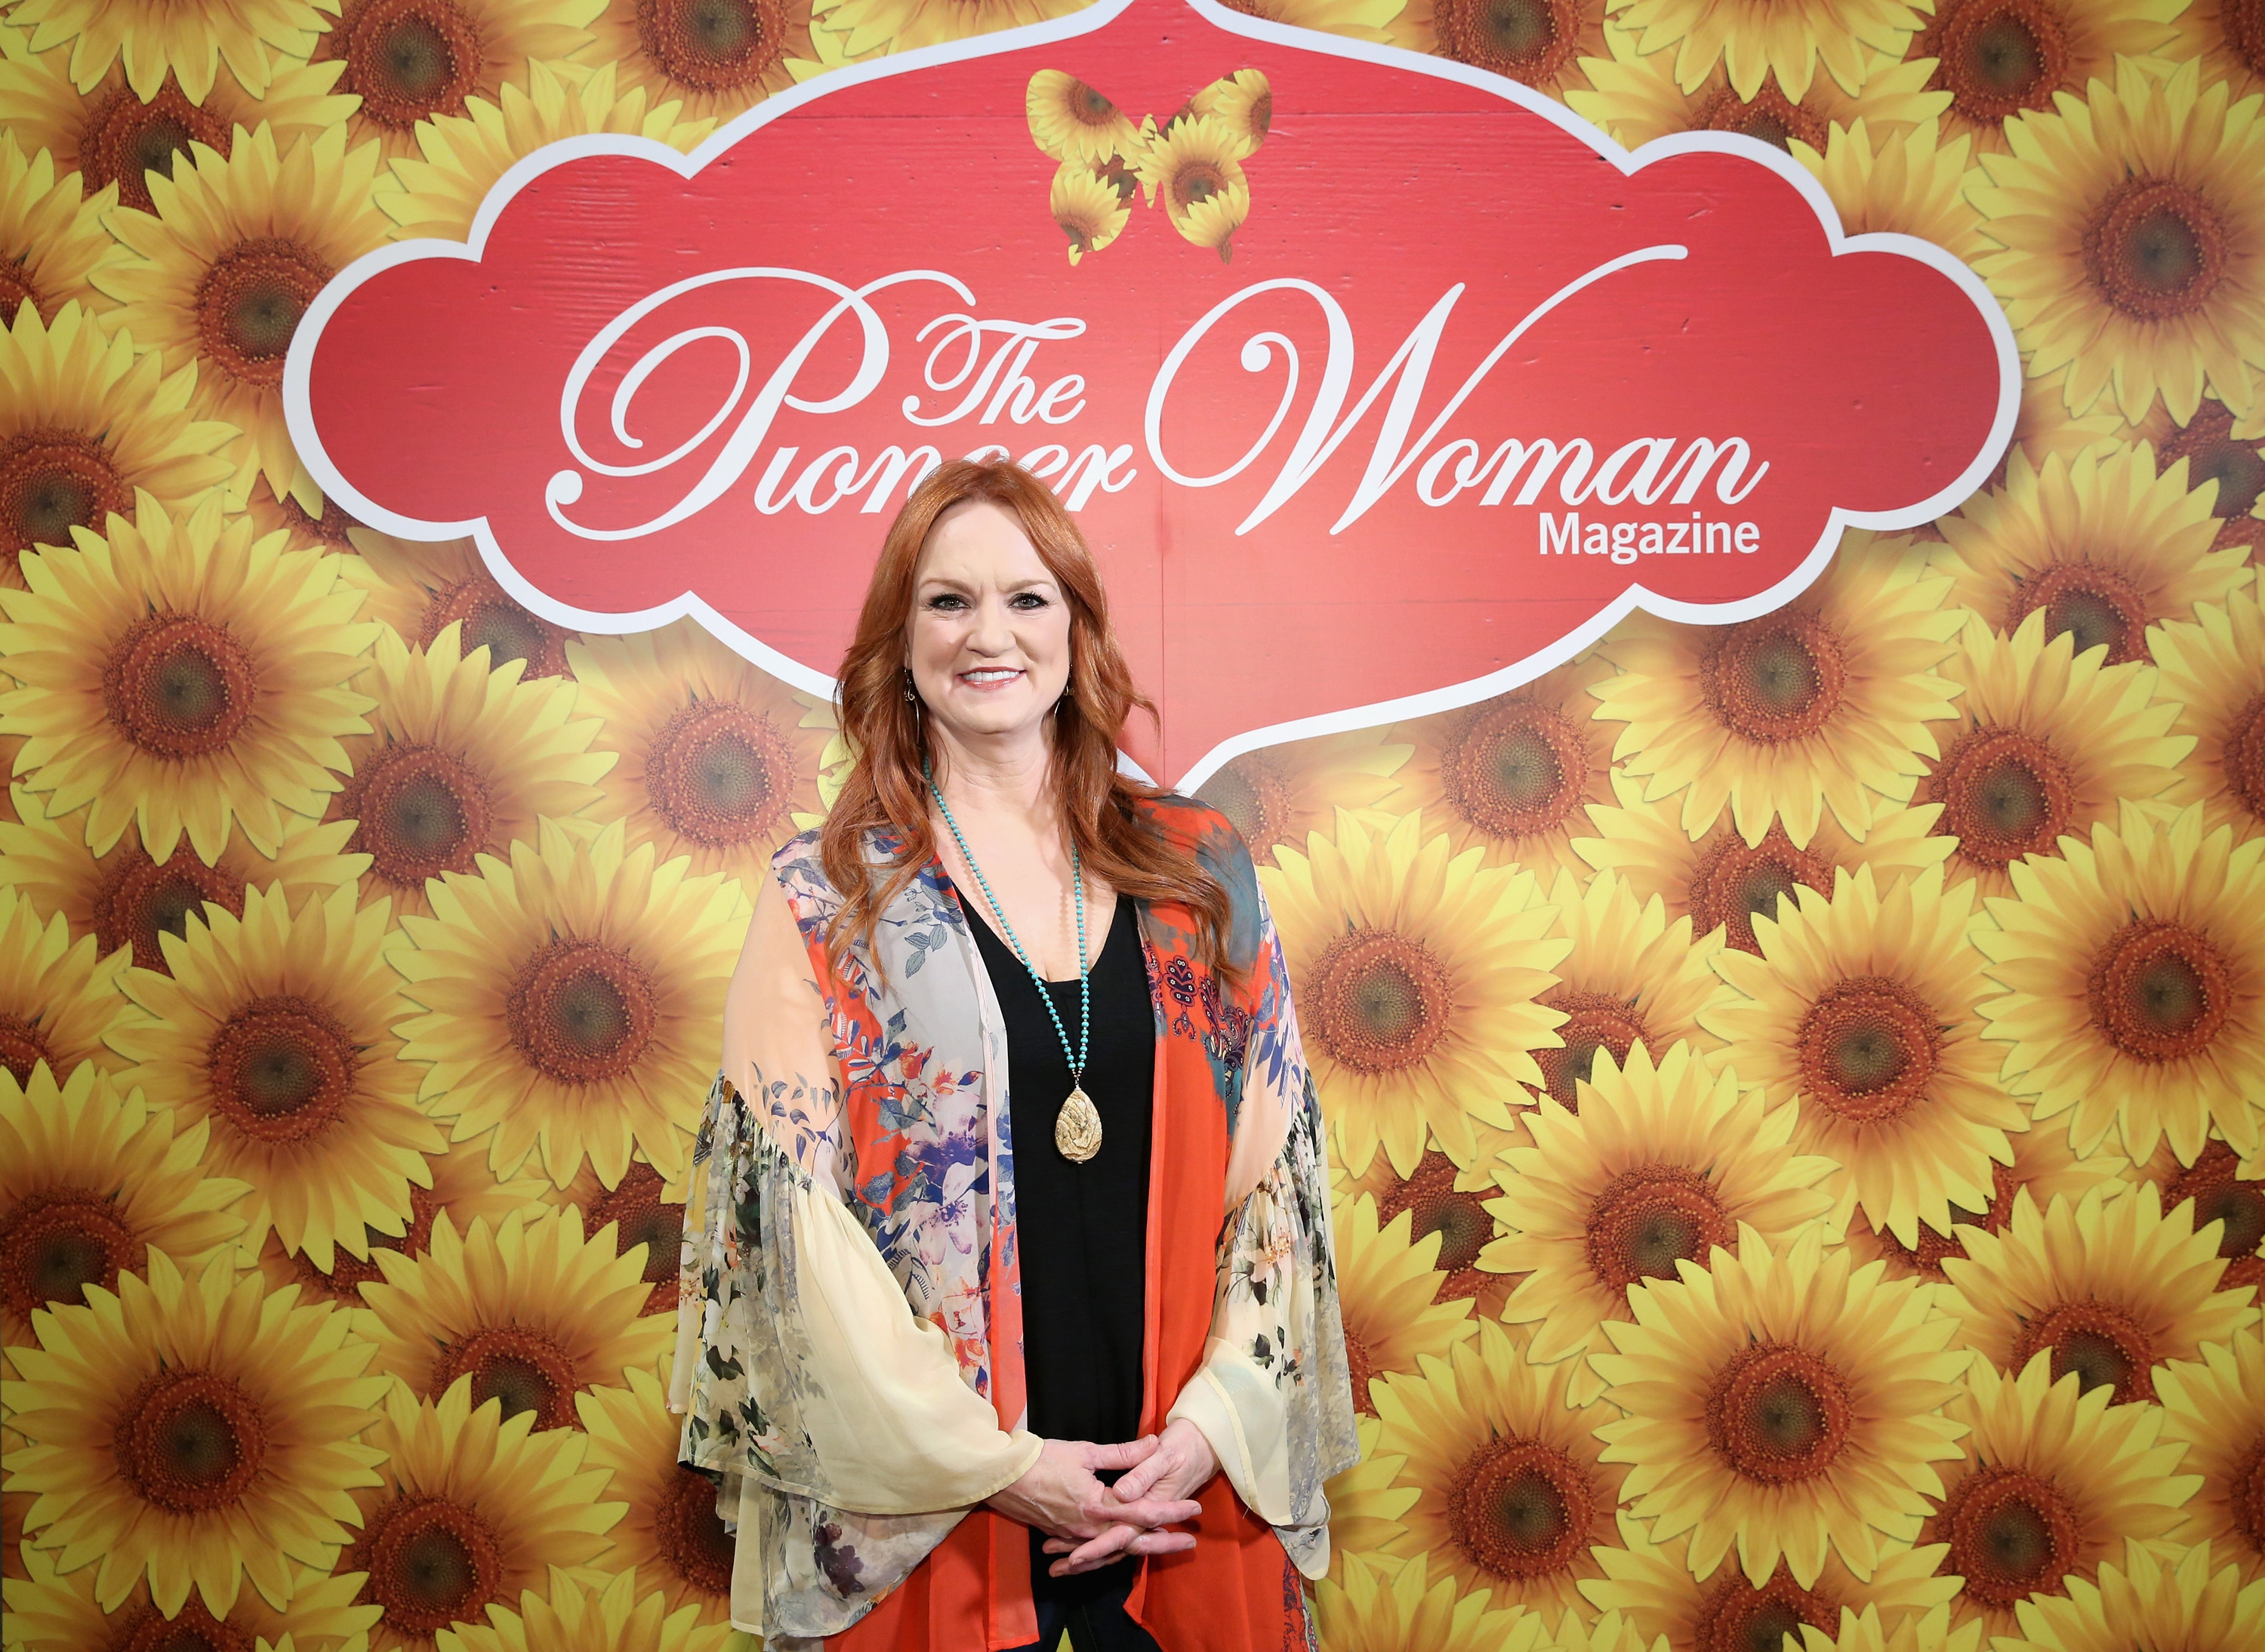 The Pioneer Woman Ree Drummond poses in front of a flower wall.